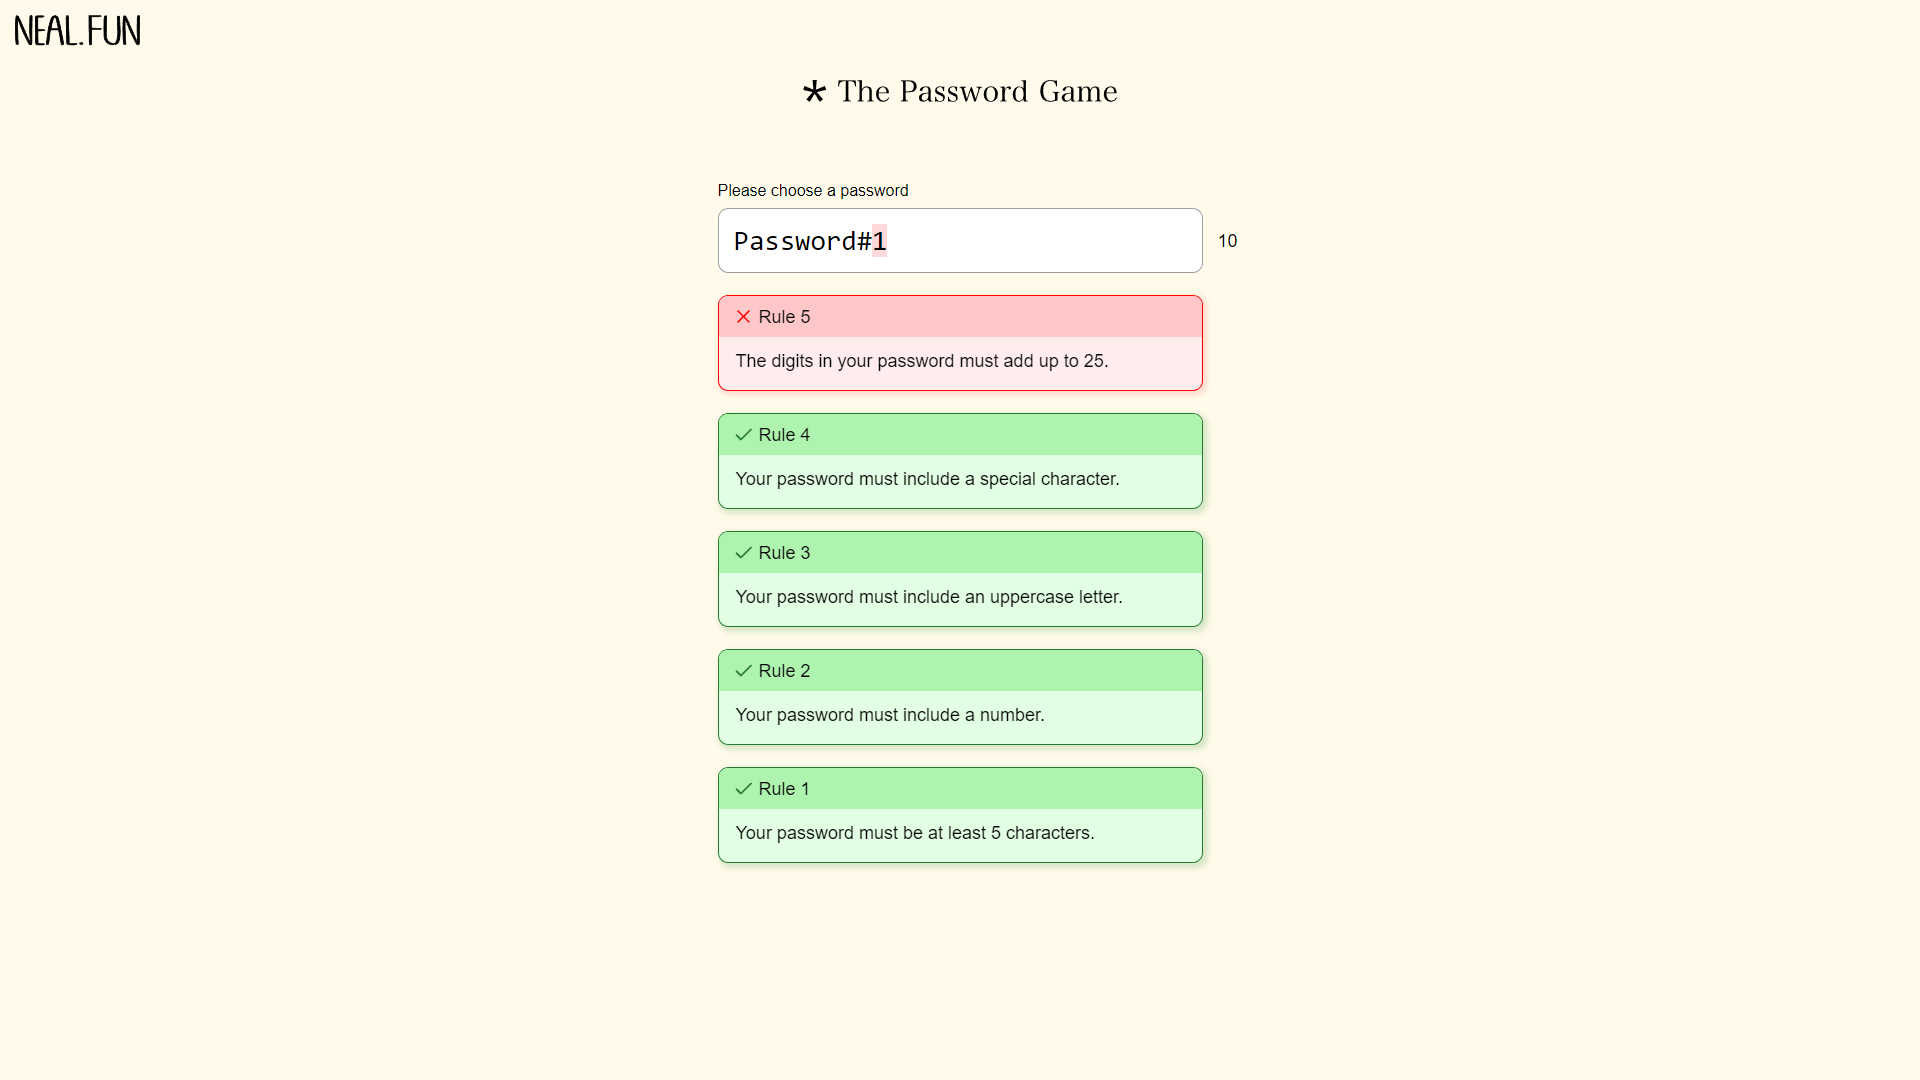 Best Move in Algebraic Chess Notation: The Password Game Guide